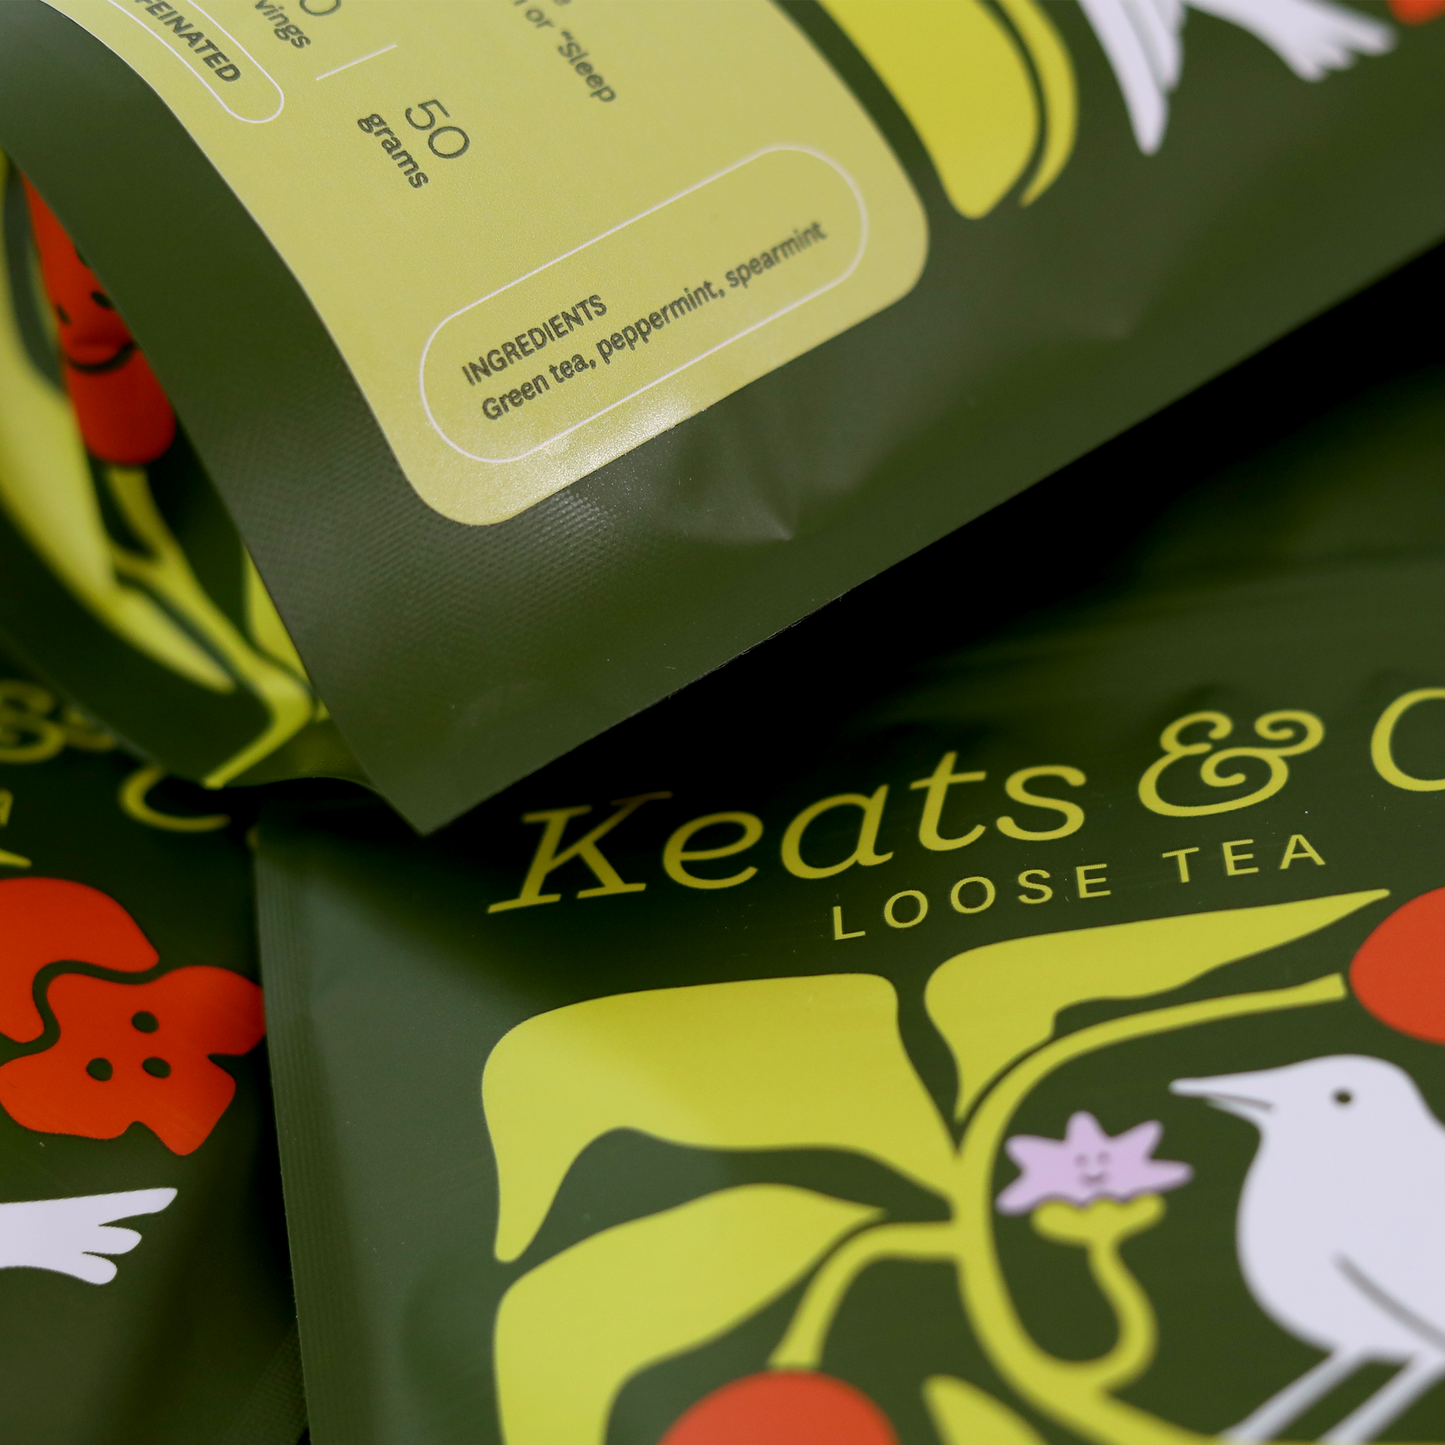 A close up of green and white tea packaging bags featuring an illustrated Nightingale logo and red floral accents are arranged to display the front and back labels. The bags contain loose leaf tea blends from Keats & Co. The front labels show the tea variety names, while the back labels provide additional product details and brewing instructions. A Good Store product.